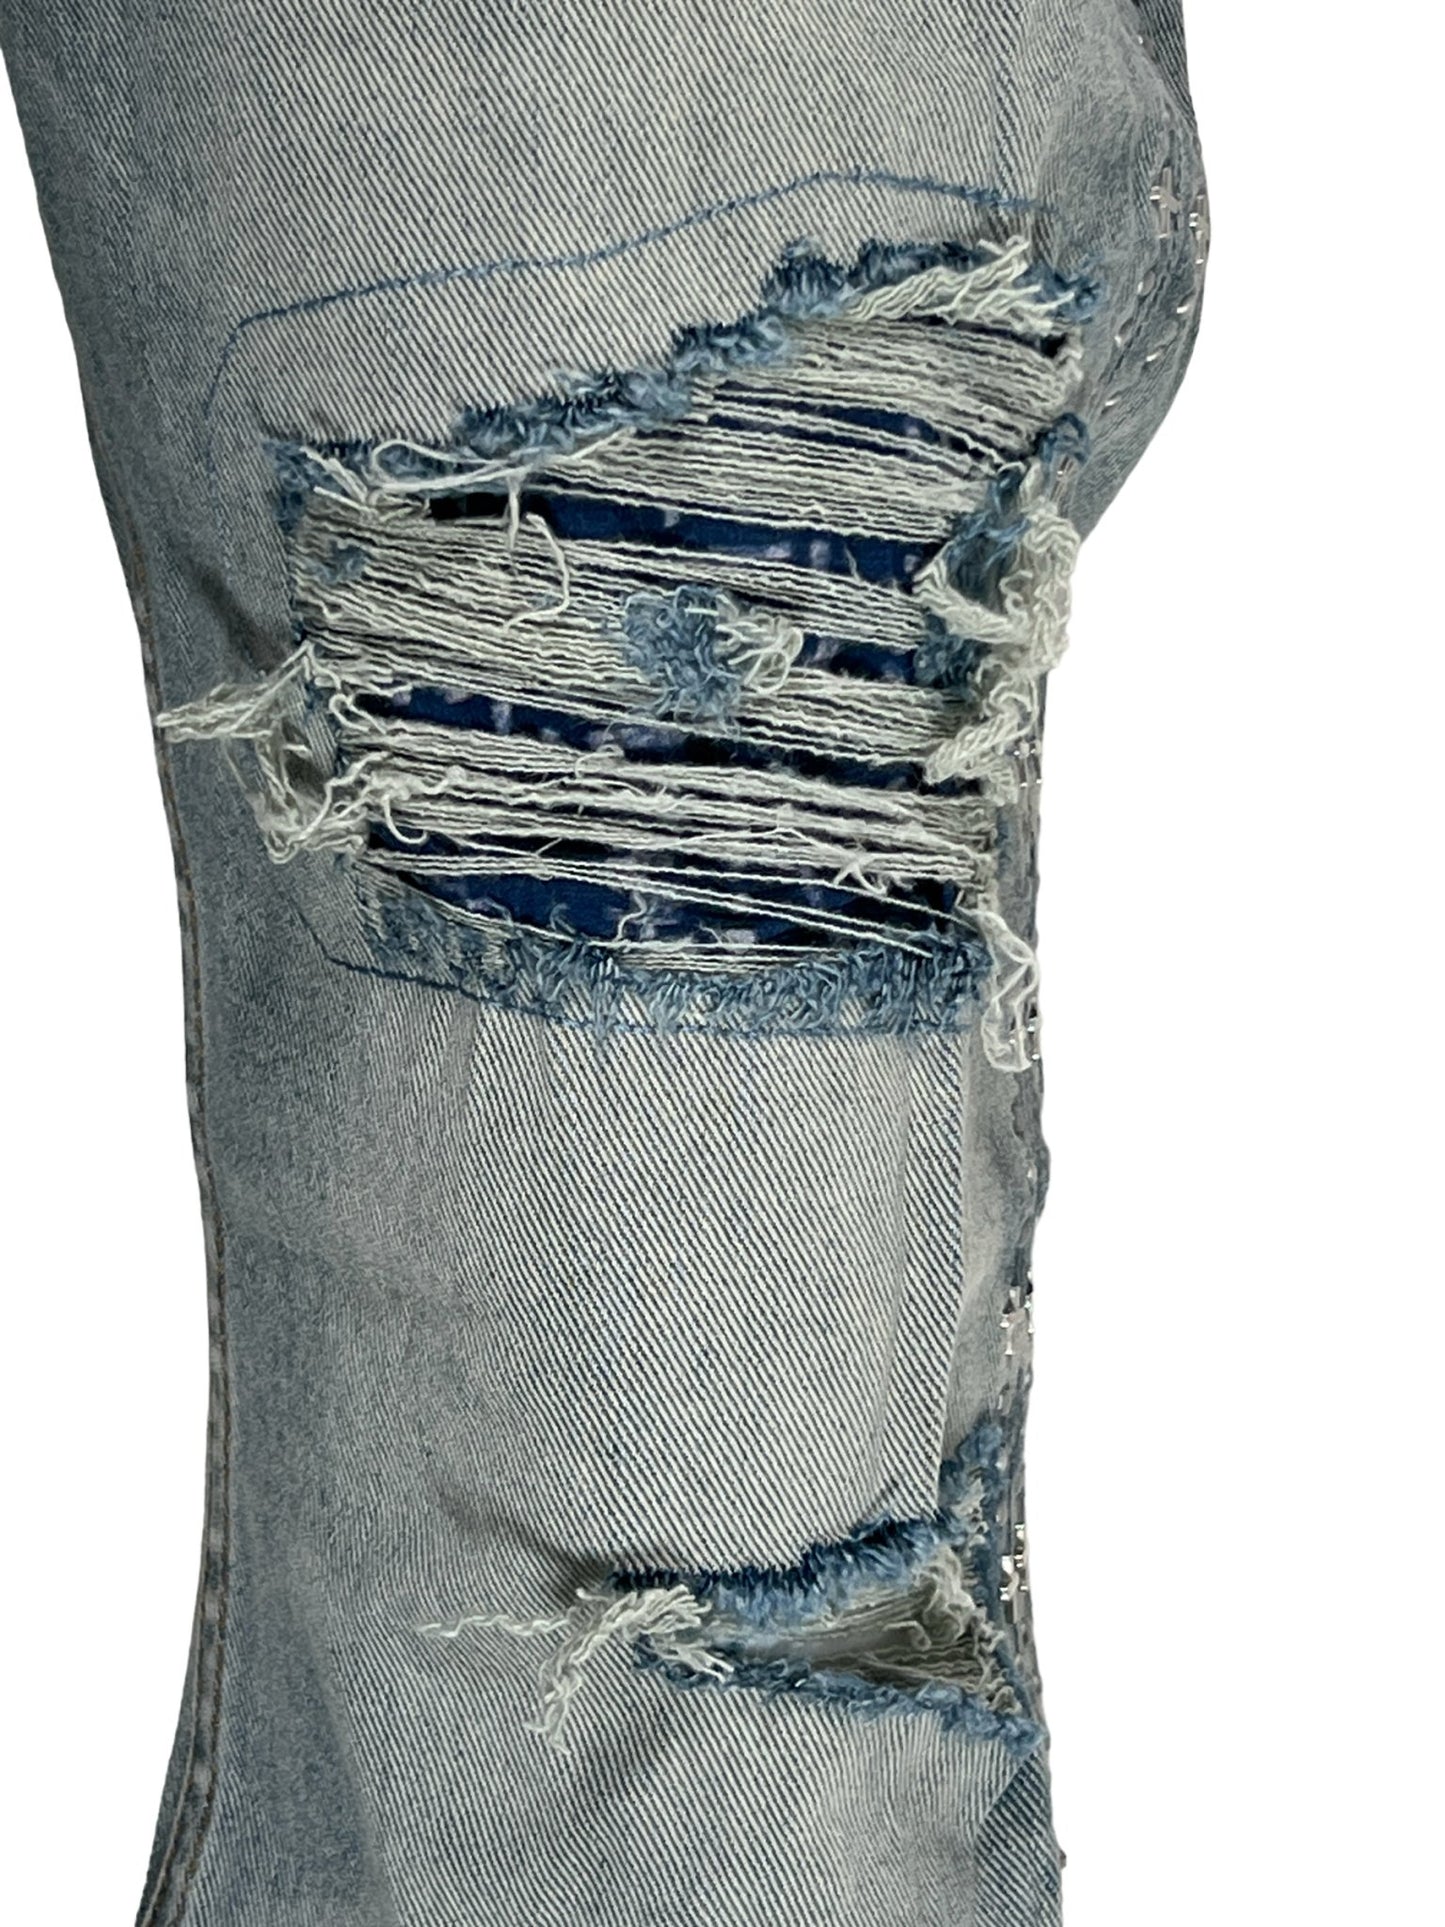 Close-up of distressed Ksubi Bronko Dynamite Metal denim fabric with frayed holes and threads.